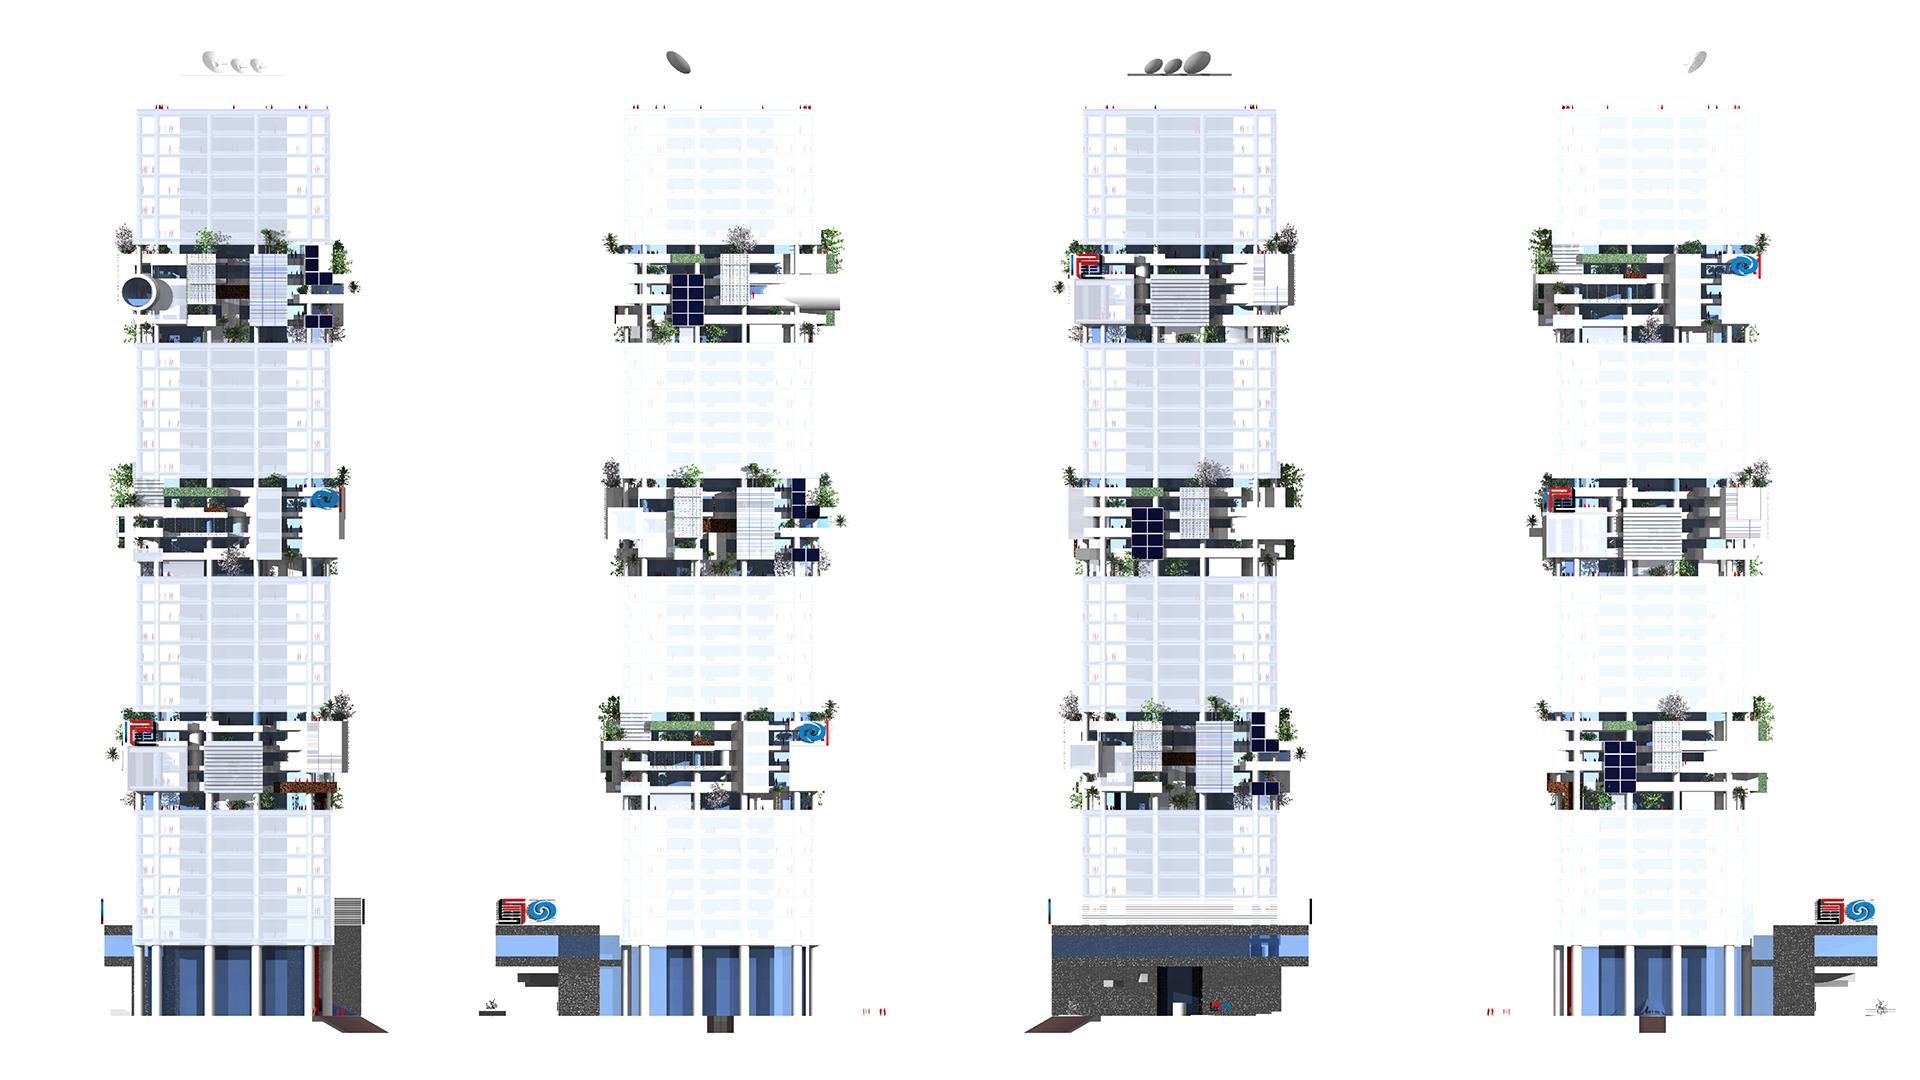 OHA - SBF TOWER 04 - Office For Heuristic Architecture